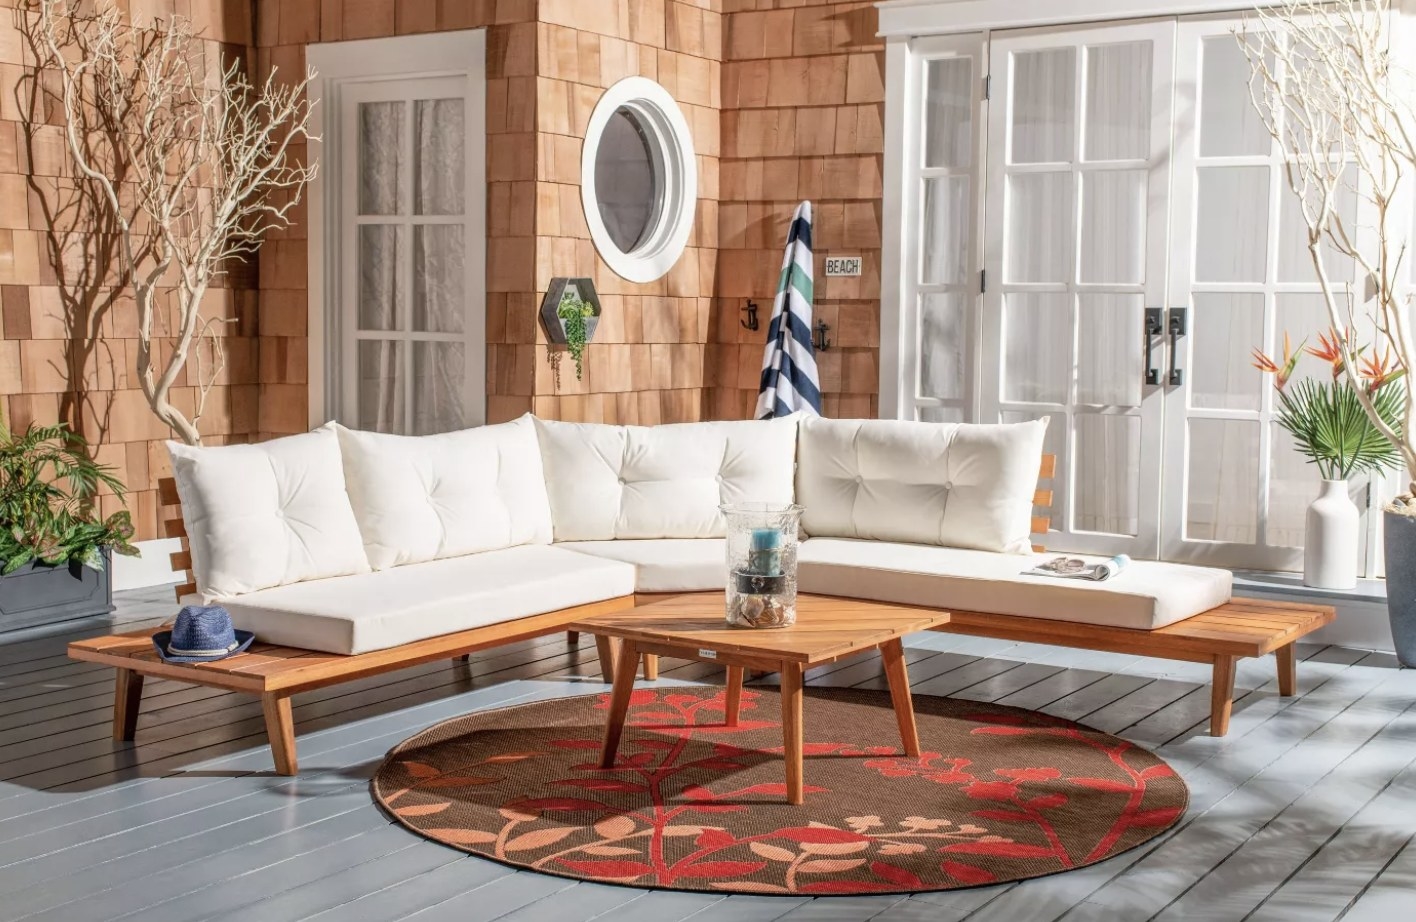 A sectional with benches that extend out to serve as end tables and a matching coffee table on a rug in front of a house